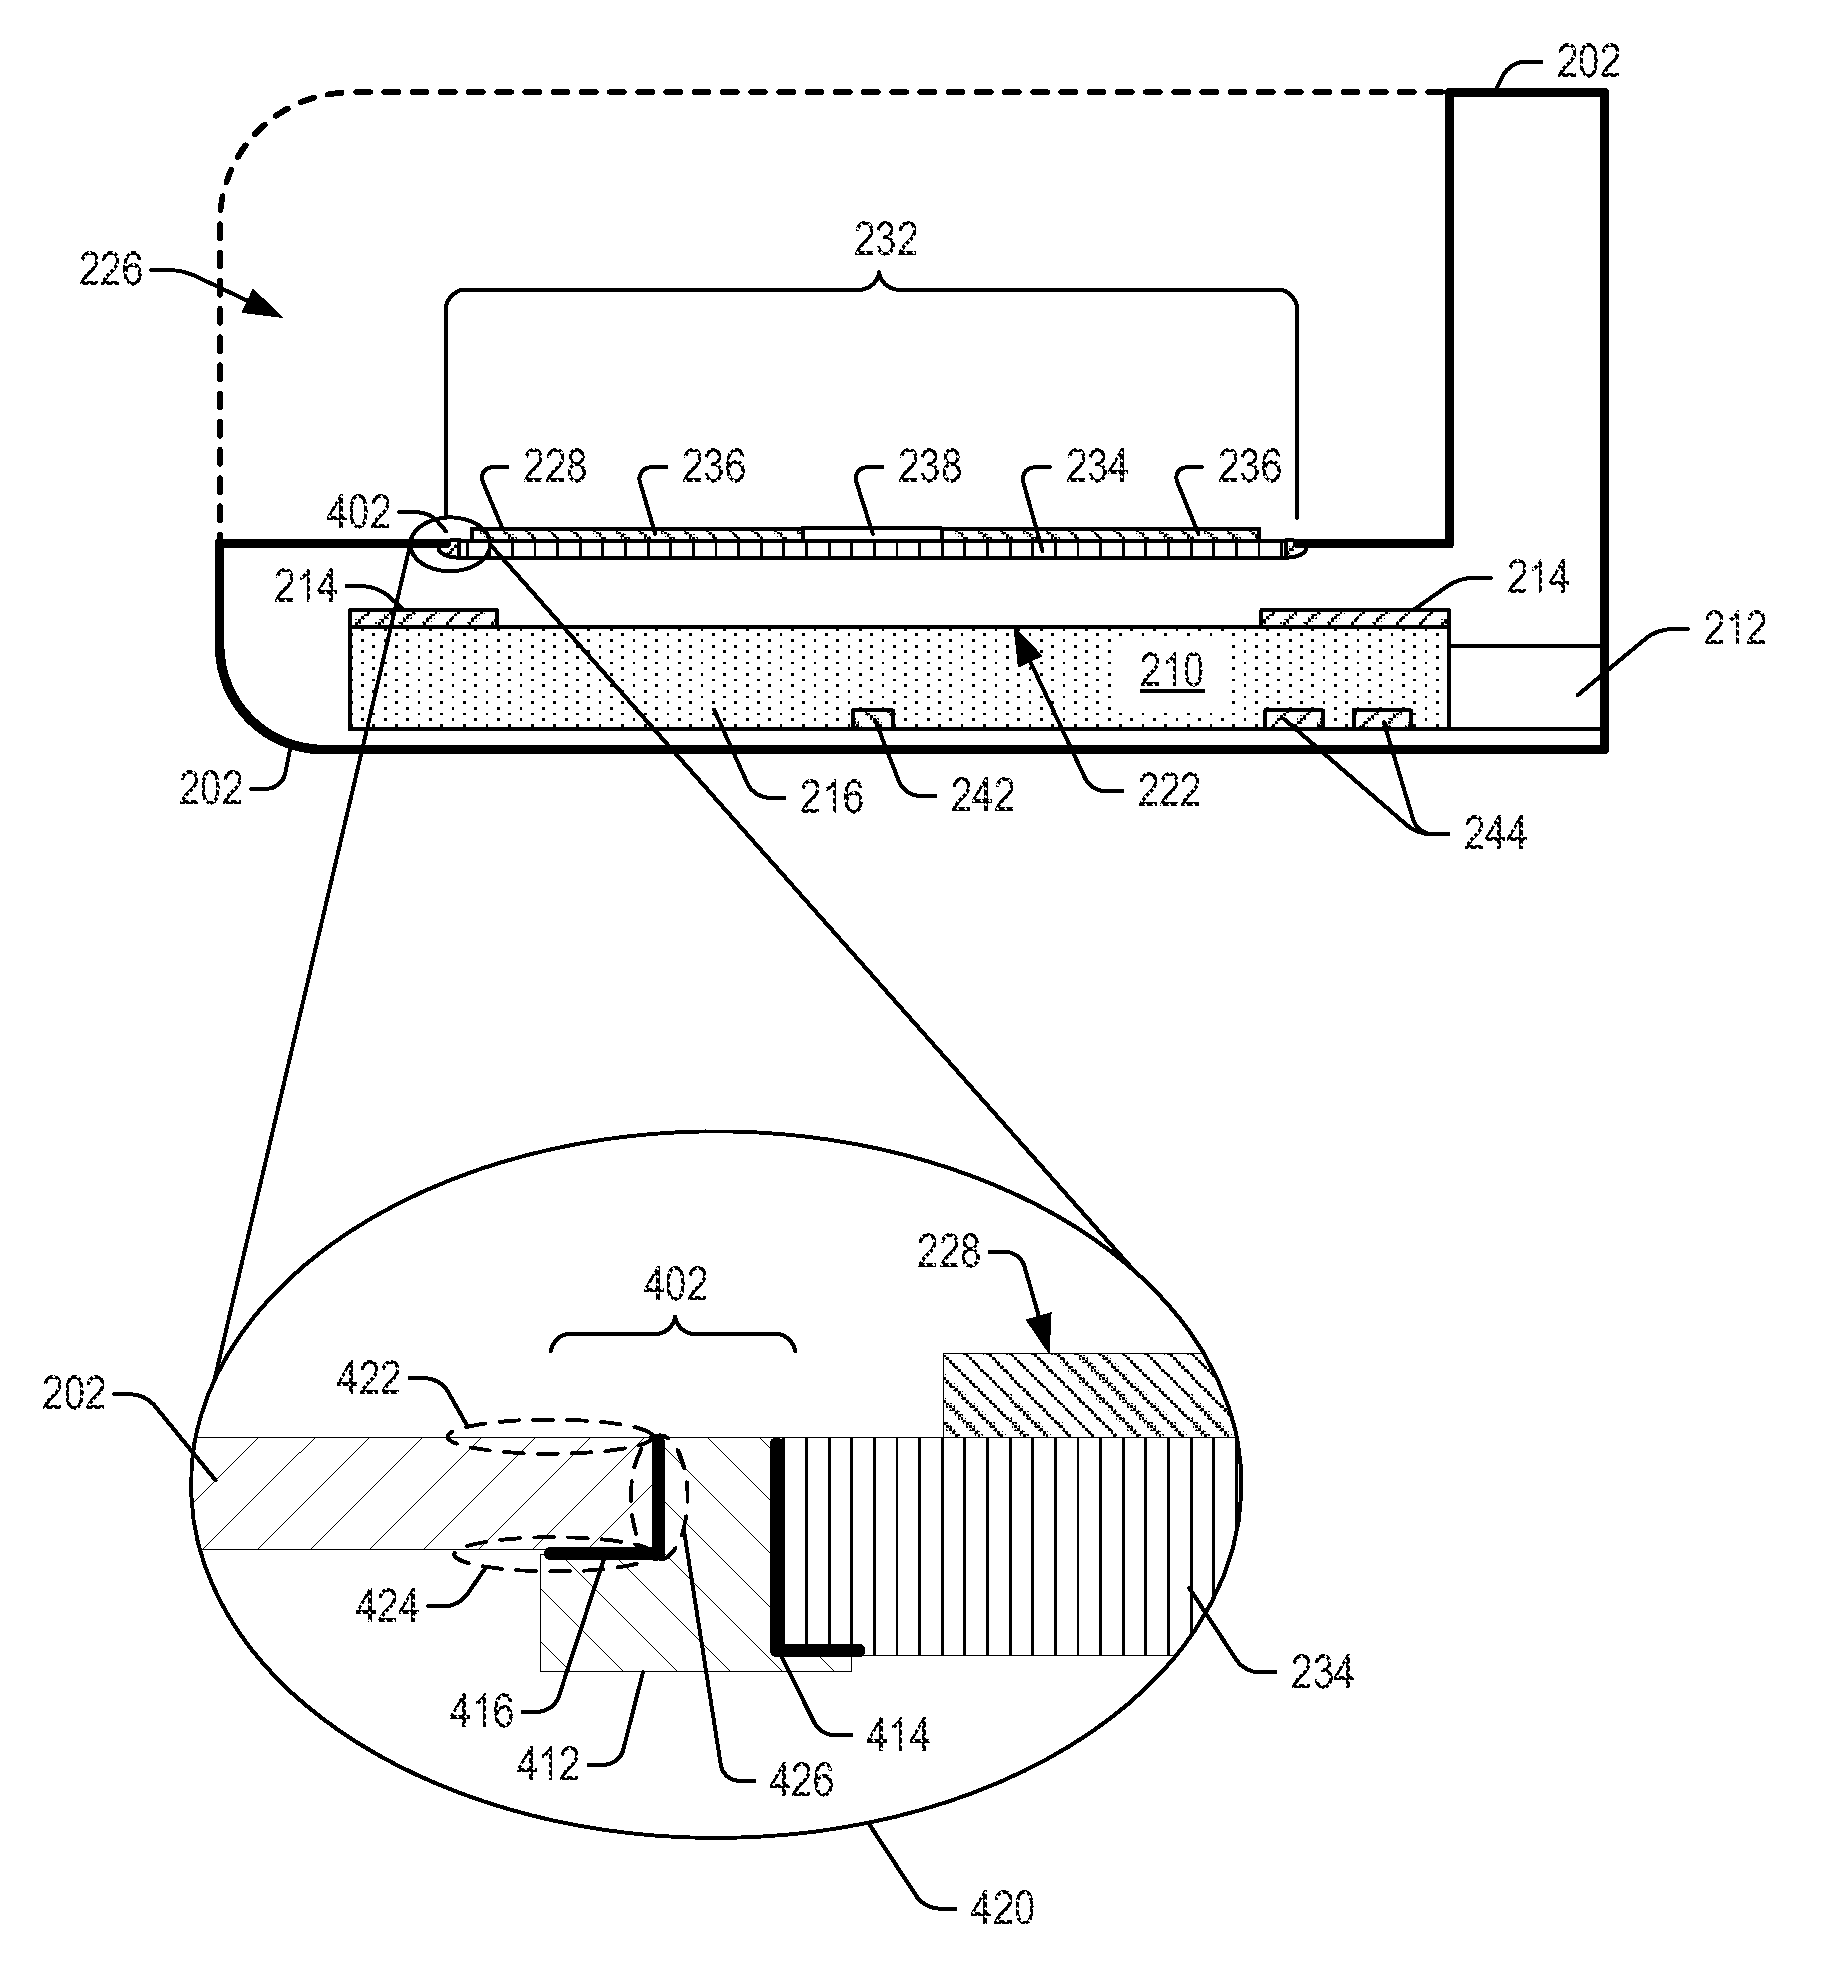 Antenna shield for an implantable medical device